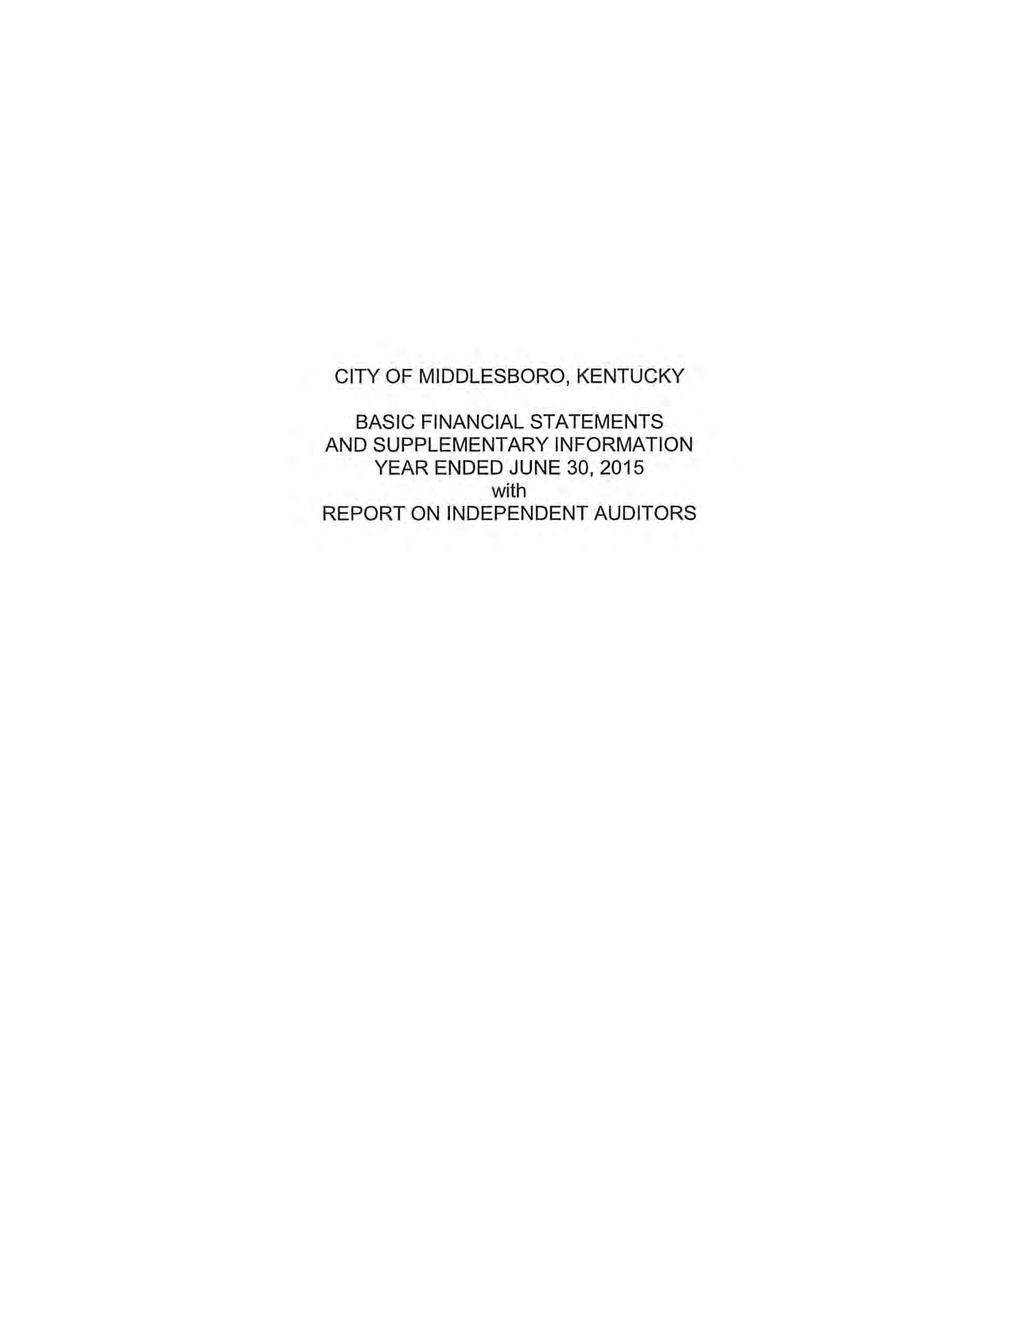 CITY OF MIDDLESBORO, KENTUCKY BASIC FINANCIAL STATEMENTS AND